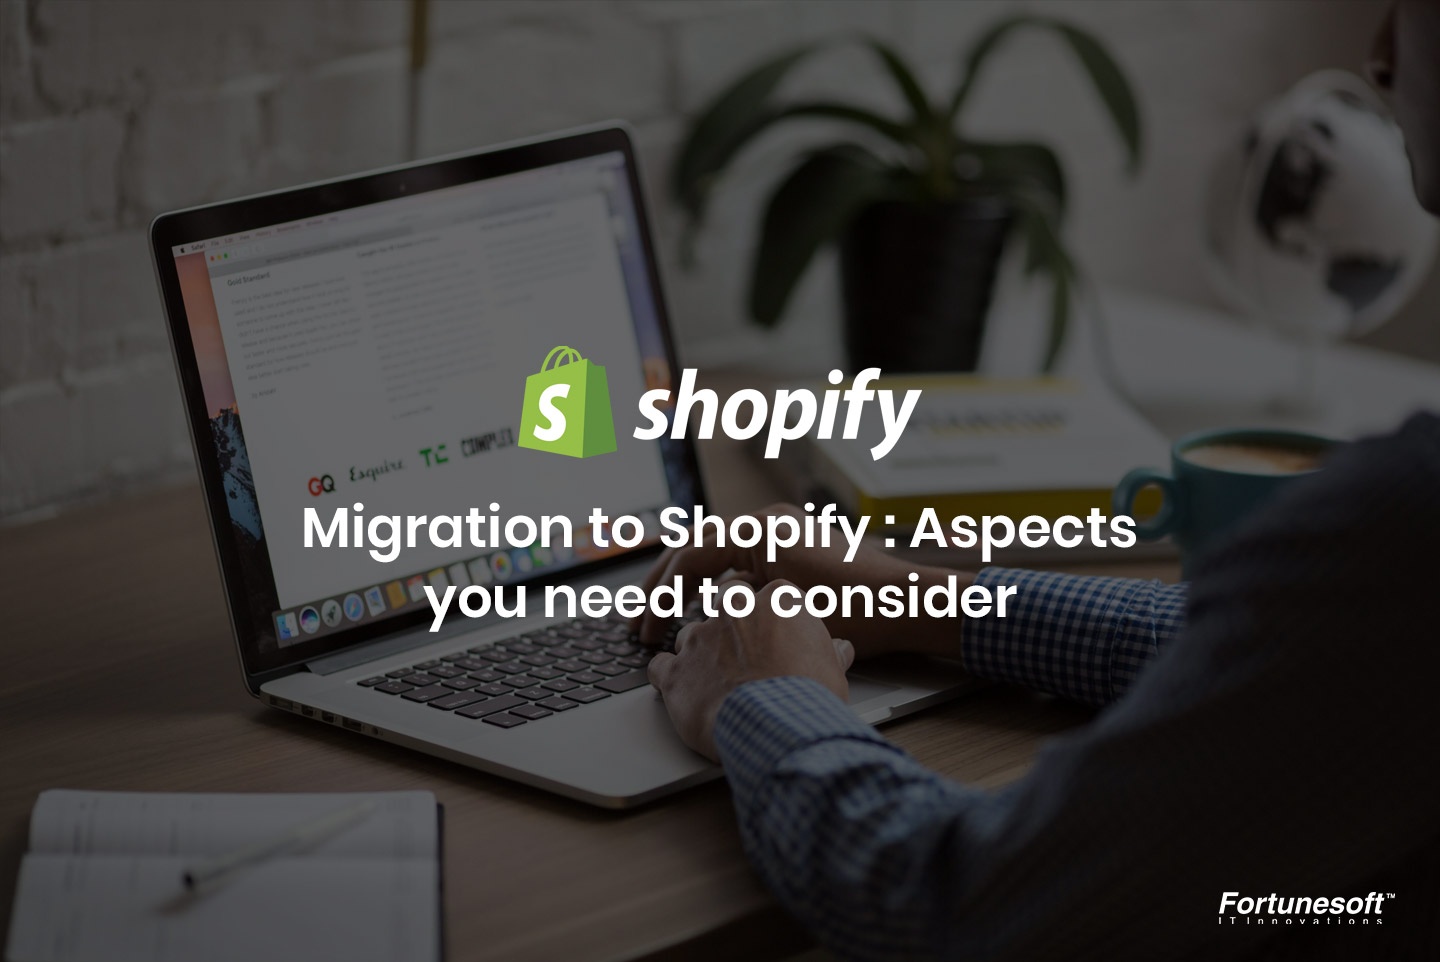 OpenCart News: Migration to Shopify : Aspects you need to consider